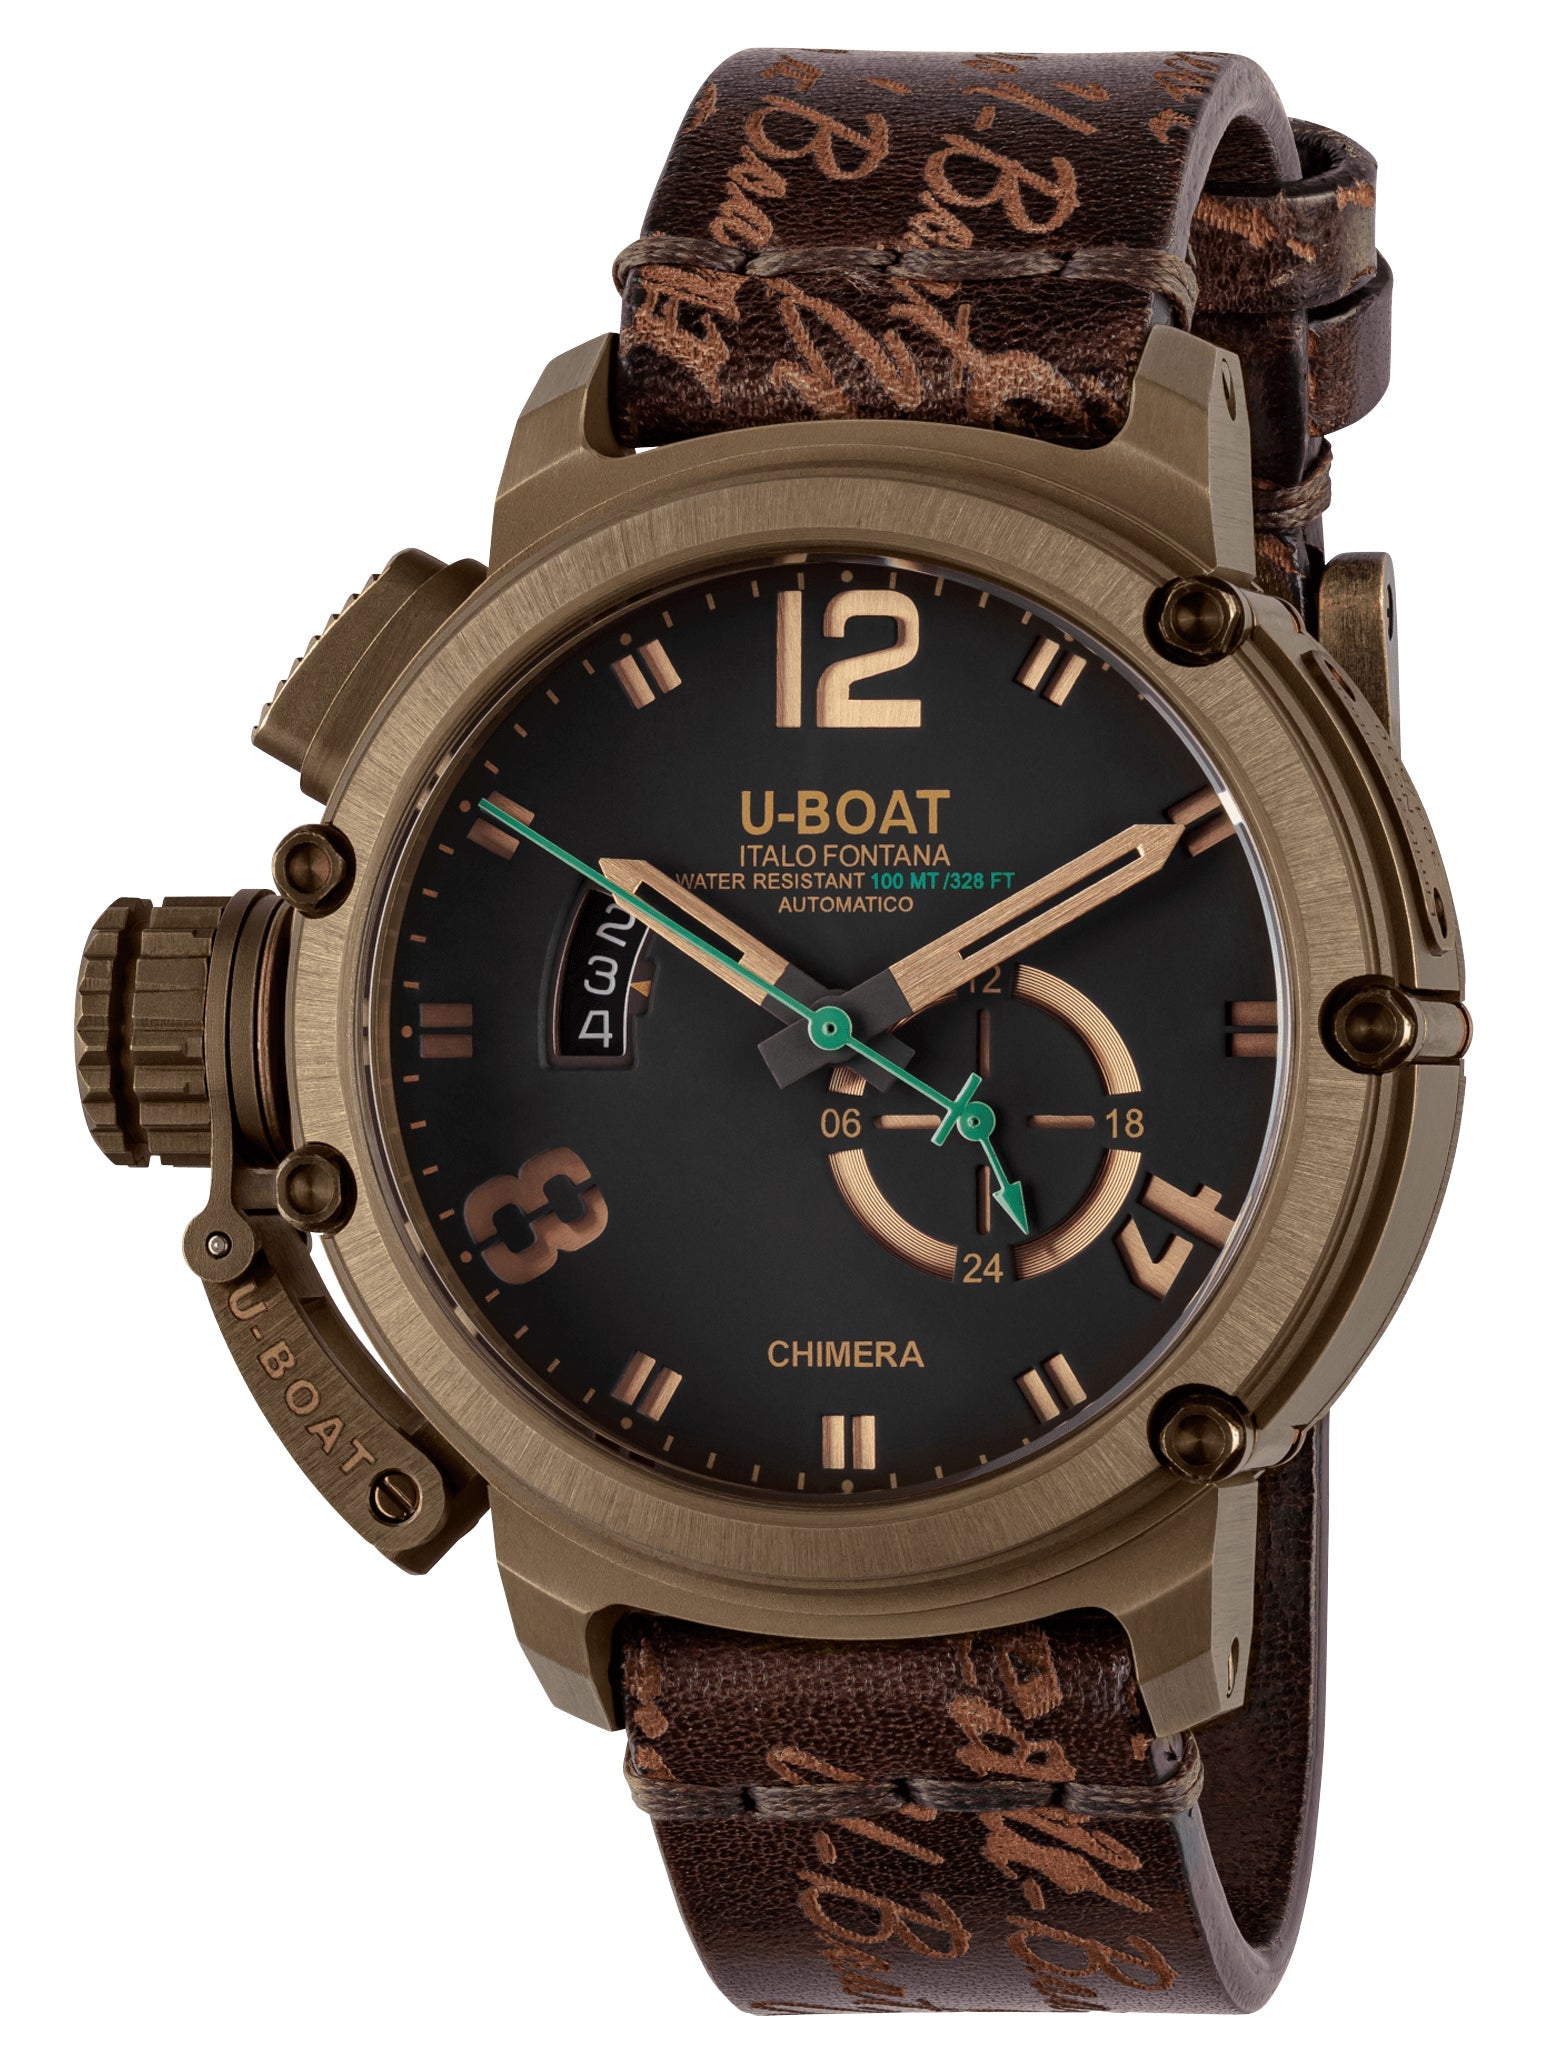 update alt-text with template Watches - Mens-U-Boat-8527-12-hour display, 24-hour display, 45 - 50 mm, bronze case, brown, Chimera, date, day/night indicator, leather, mens, menswatches, new arrivals, round, rpSKU_8890, rpSKU_8891, rpSKU_8893, rpSKU_9007, rpSKU_9015, swiss automatic, U-Boat, watches-Watches & Beyond